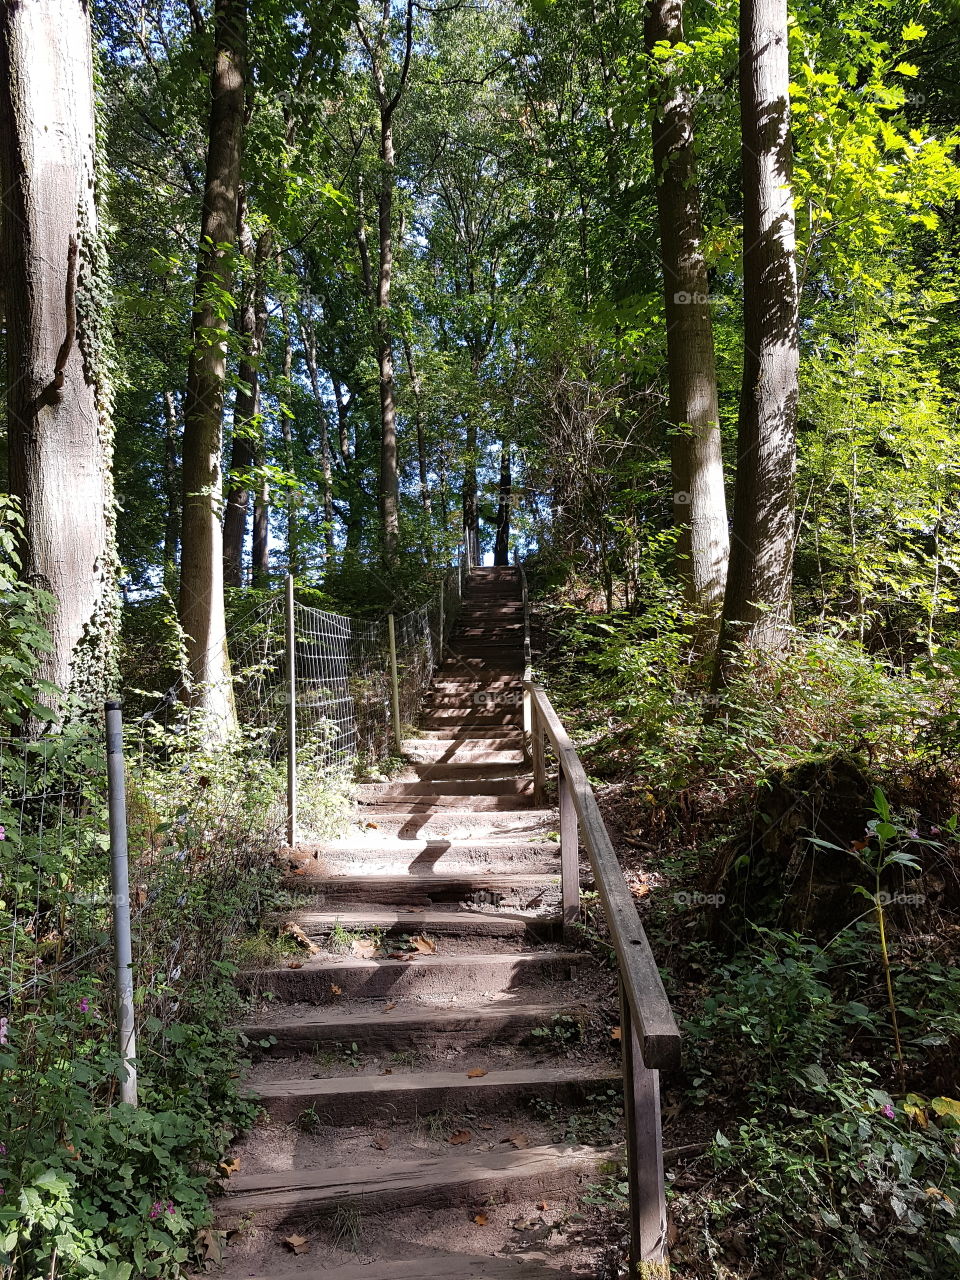 A steep staircase in the woods